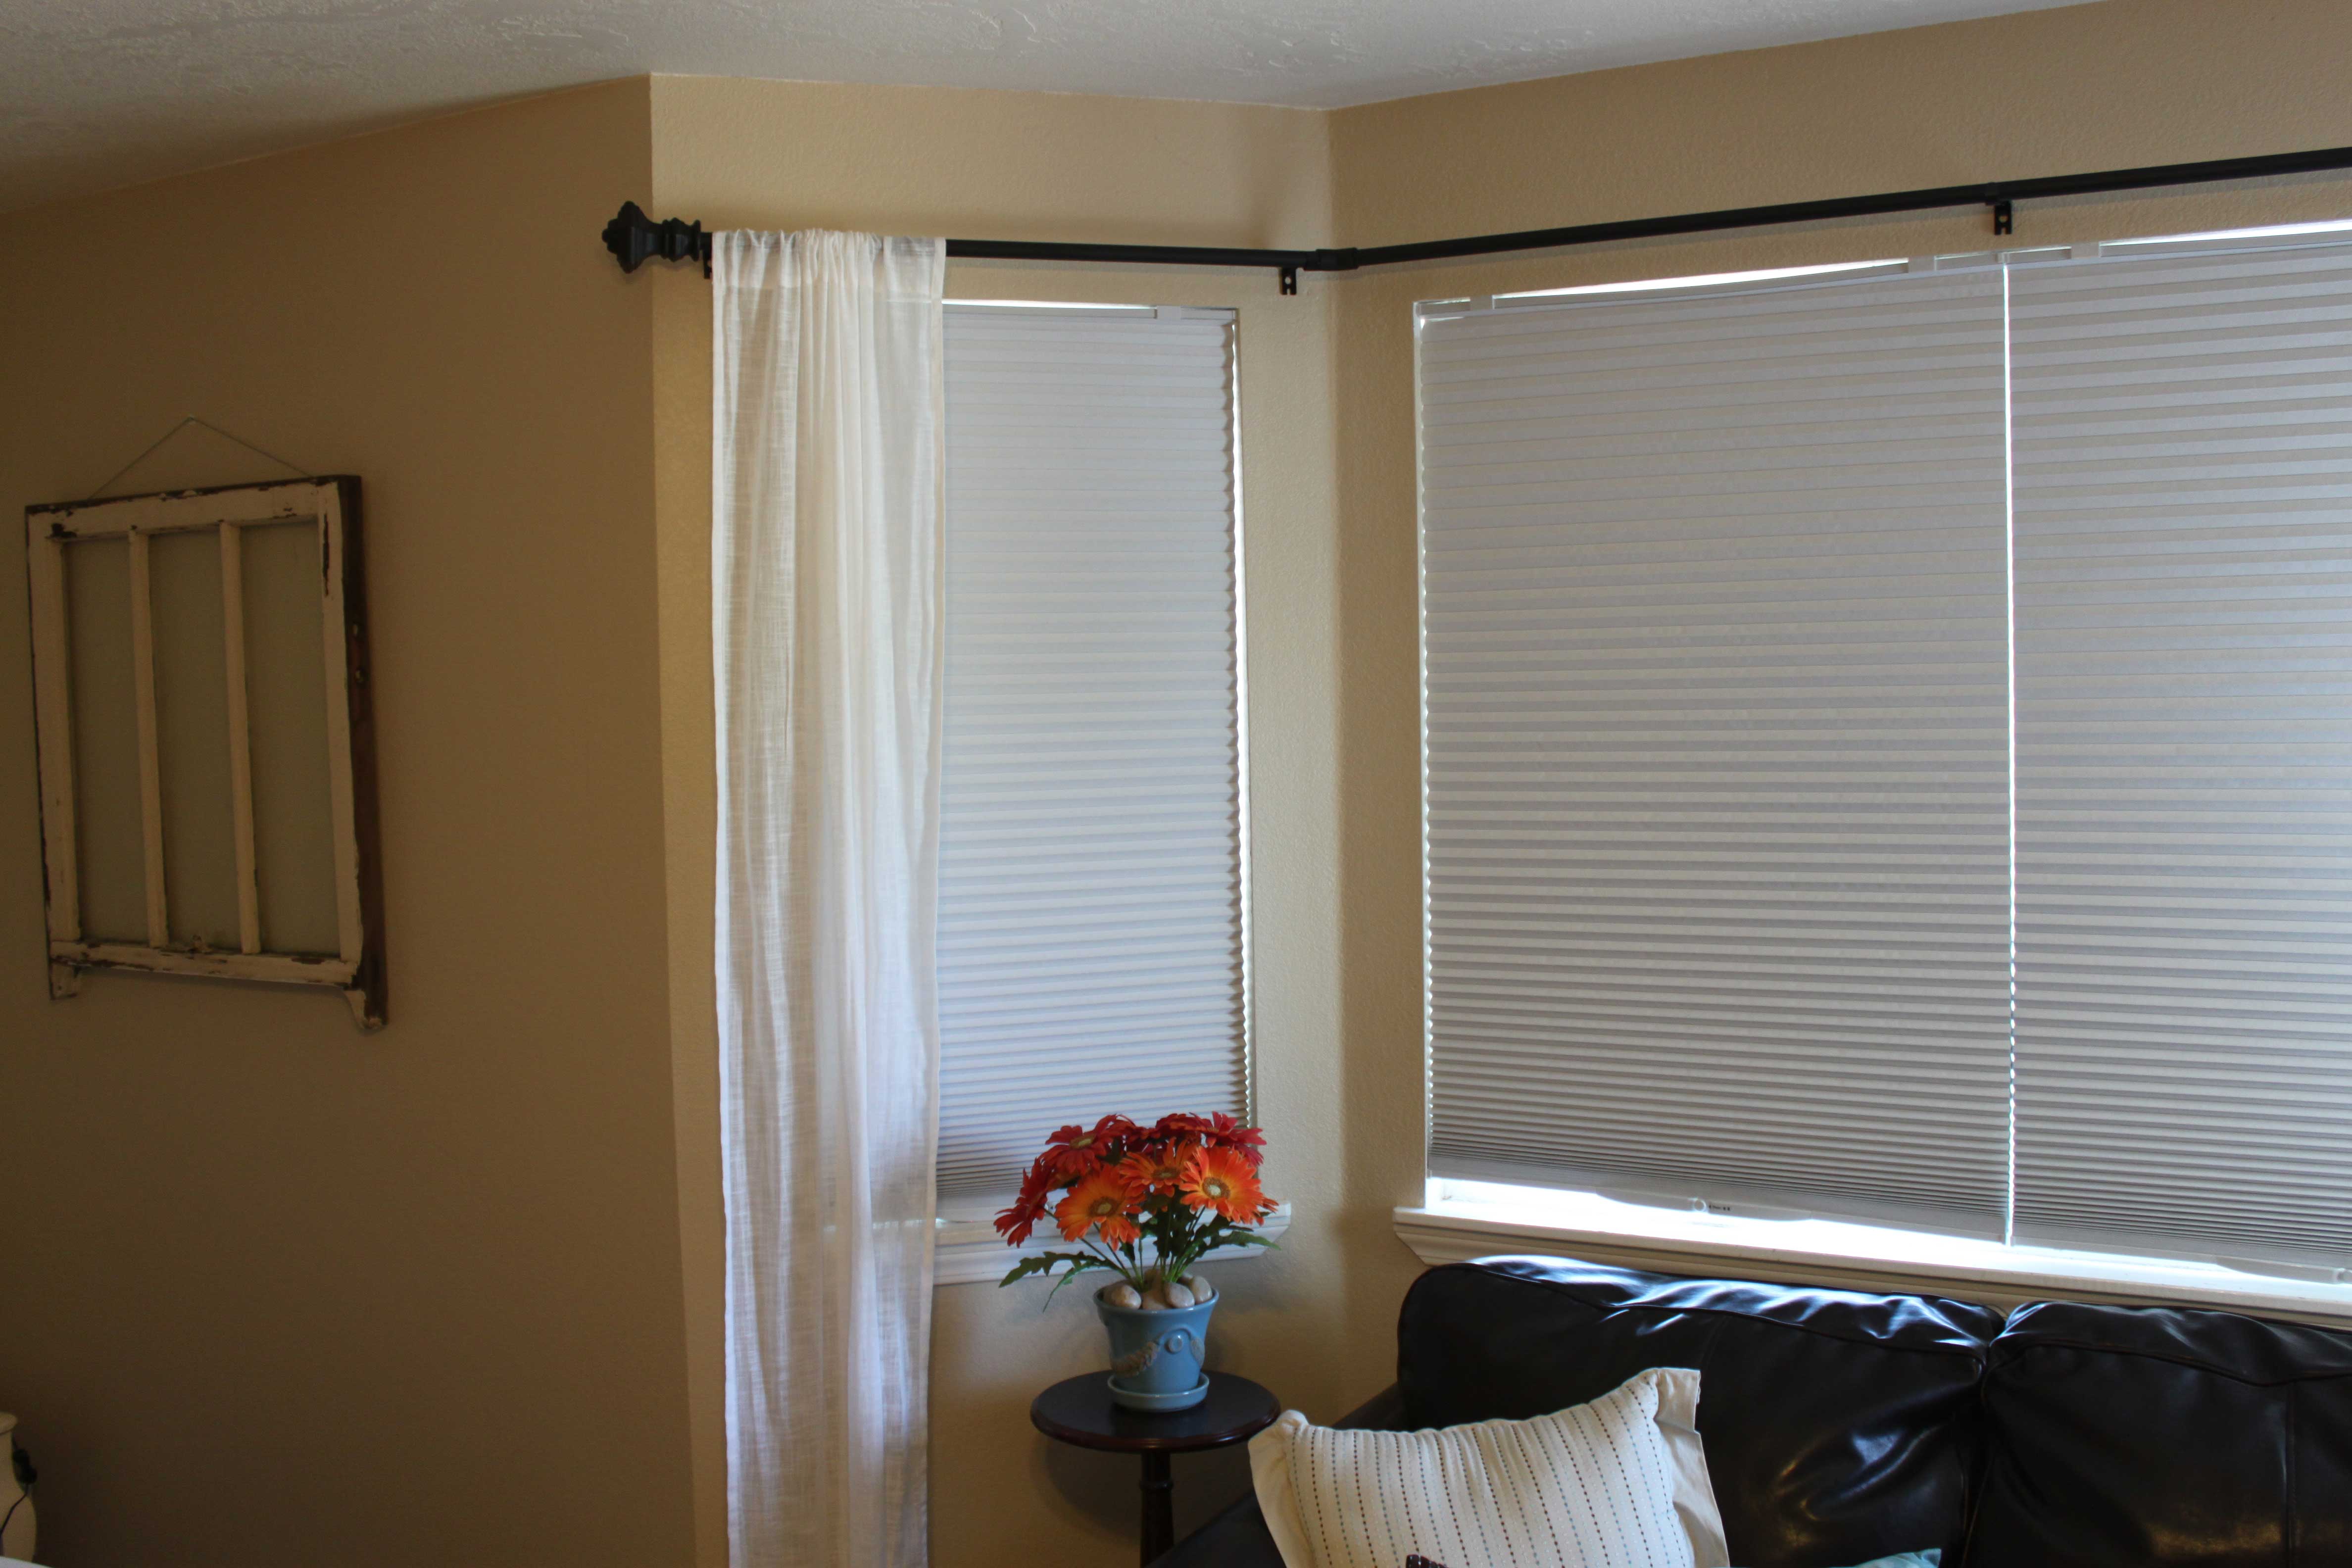 Diy Bay Window Curtain Rod Pvc Pipe Off, How Do You Hang Curtains In A Bay Window